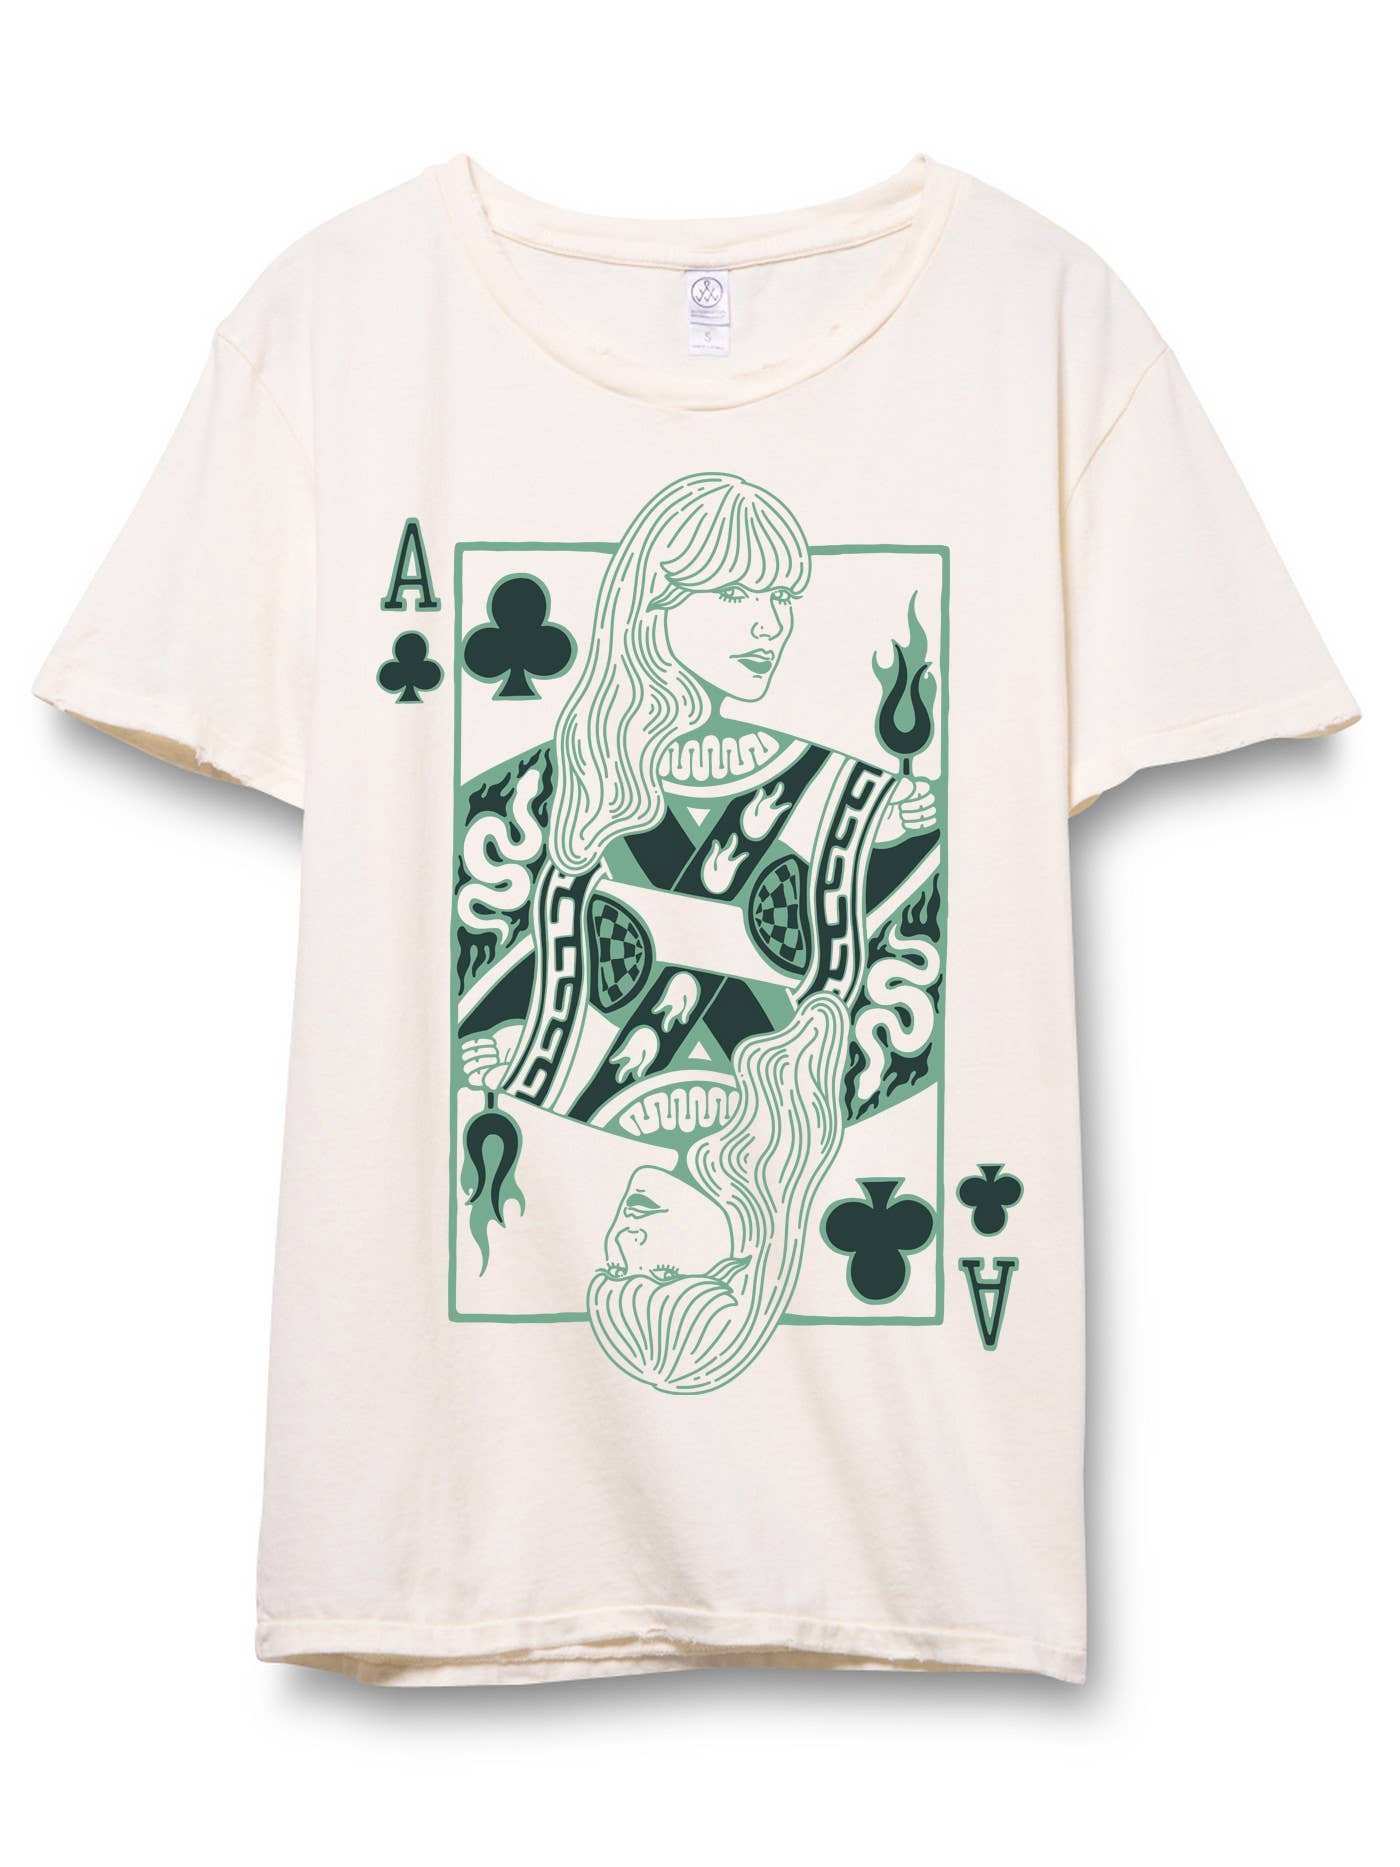 Ace of Clubs Tee